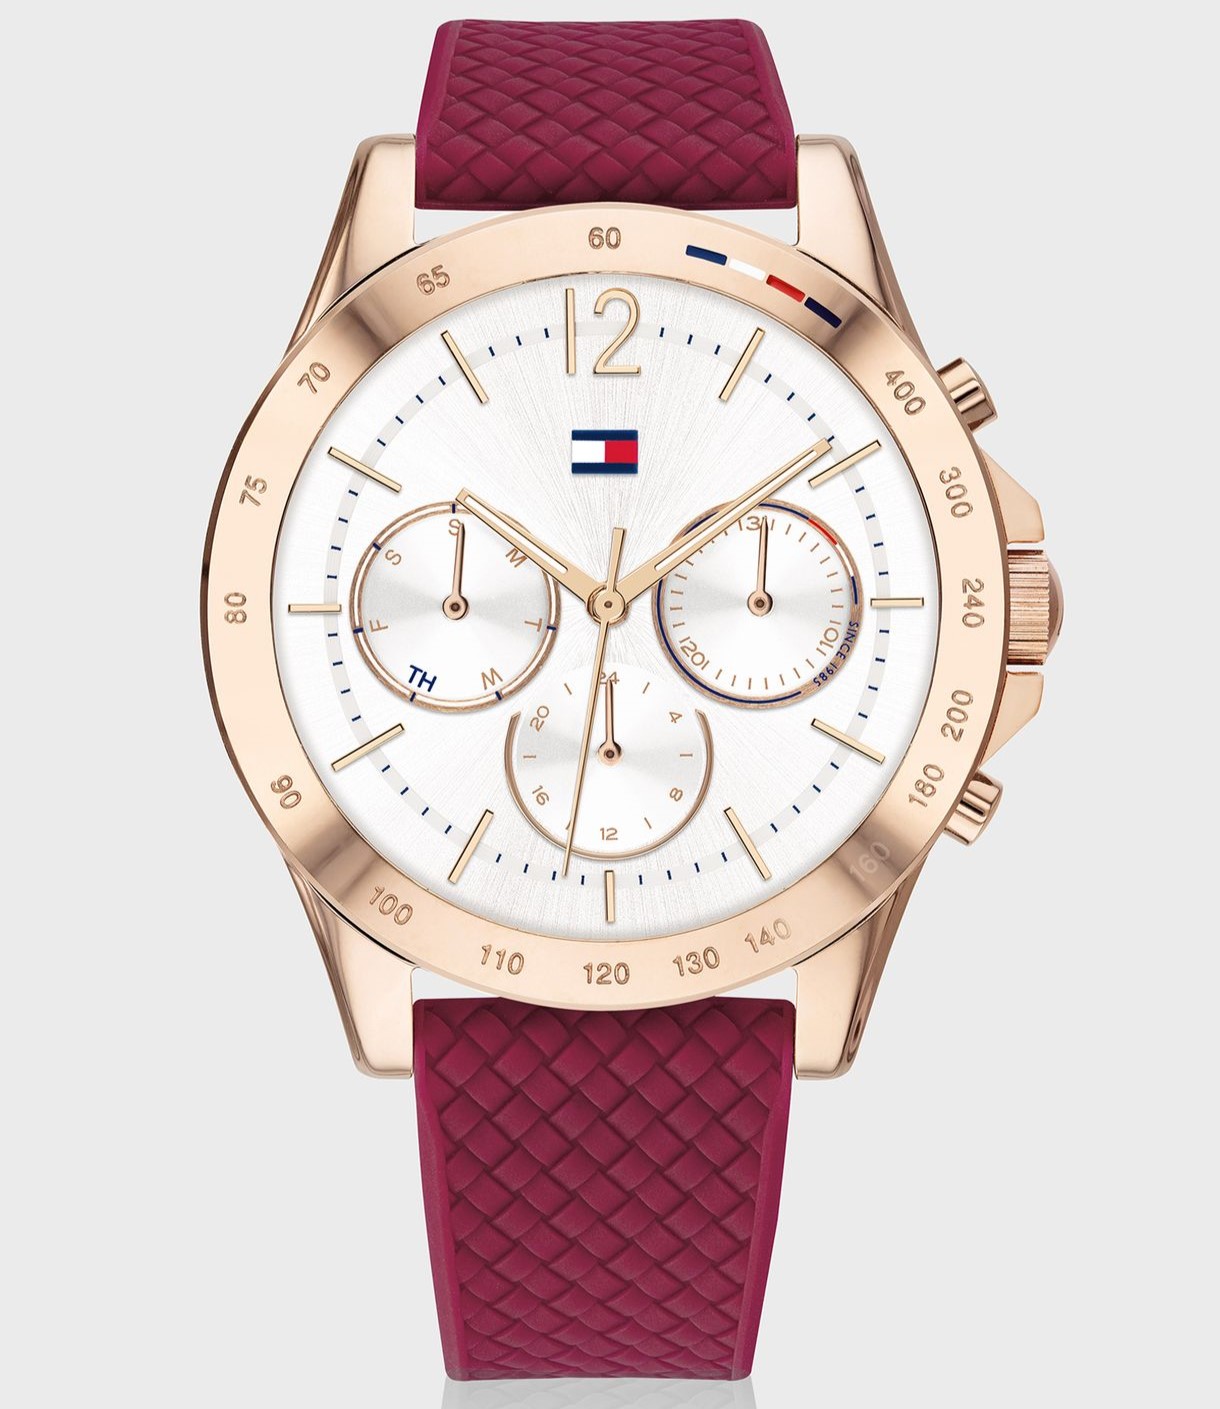 ĐỒNG HỒ NỮ TOMMY HILFIGER ROSE GOLD SPORT WATCH WITH RED SILICONE STRAP HAVEN ANALOG WATCH FOR WOMEN TH1782200W 6